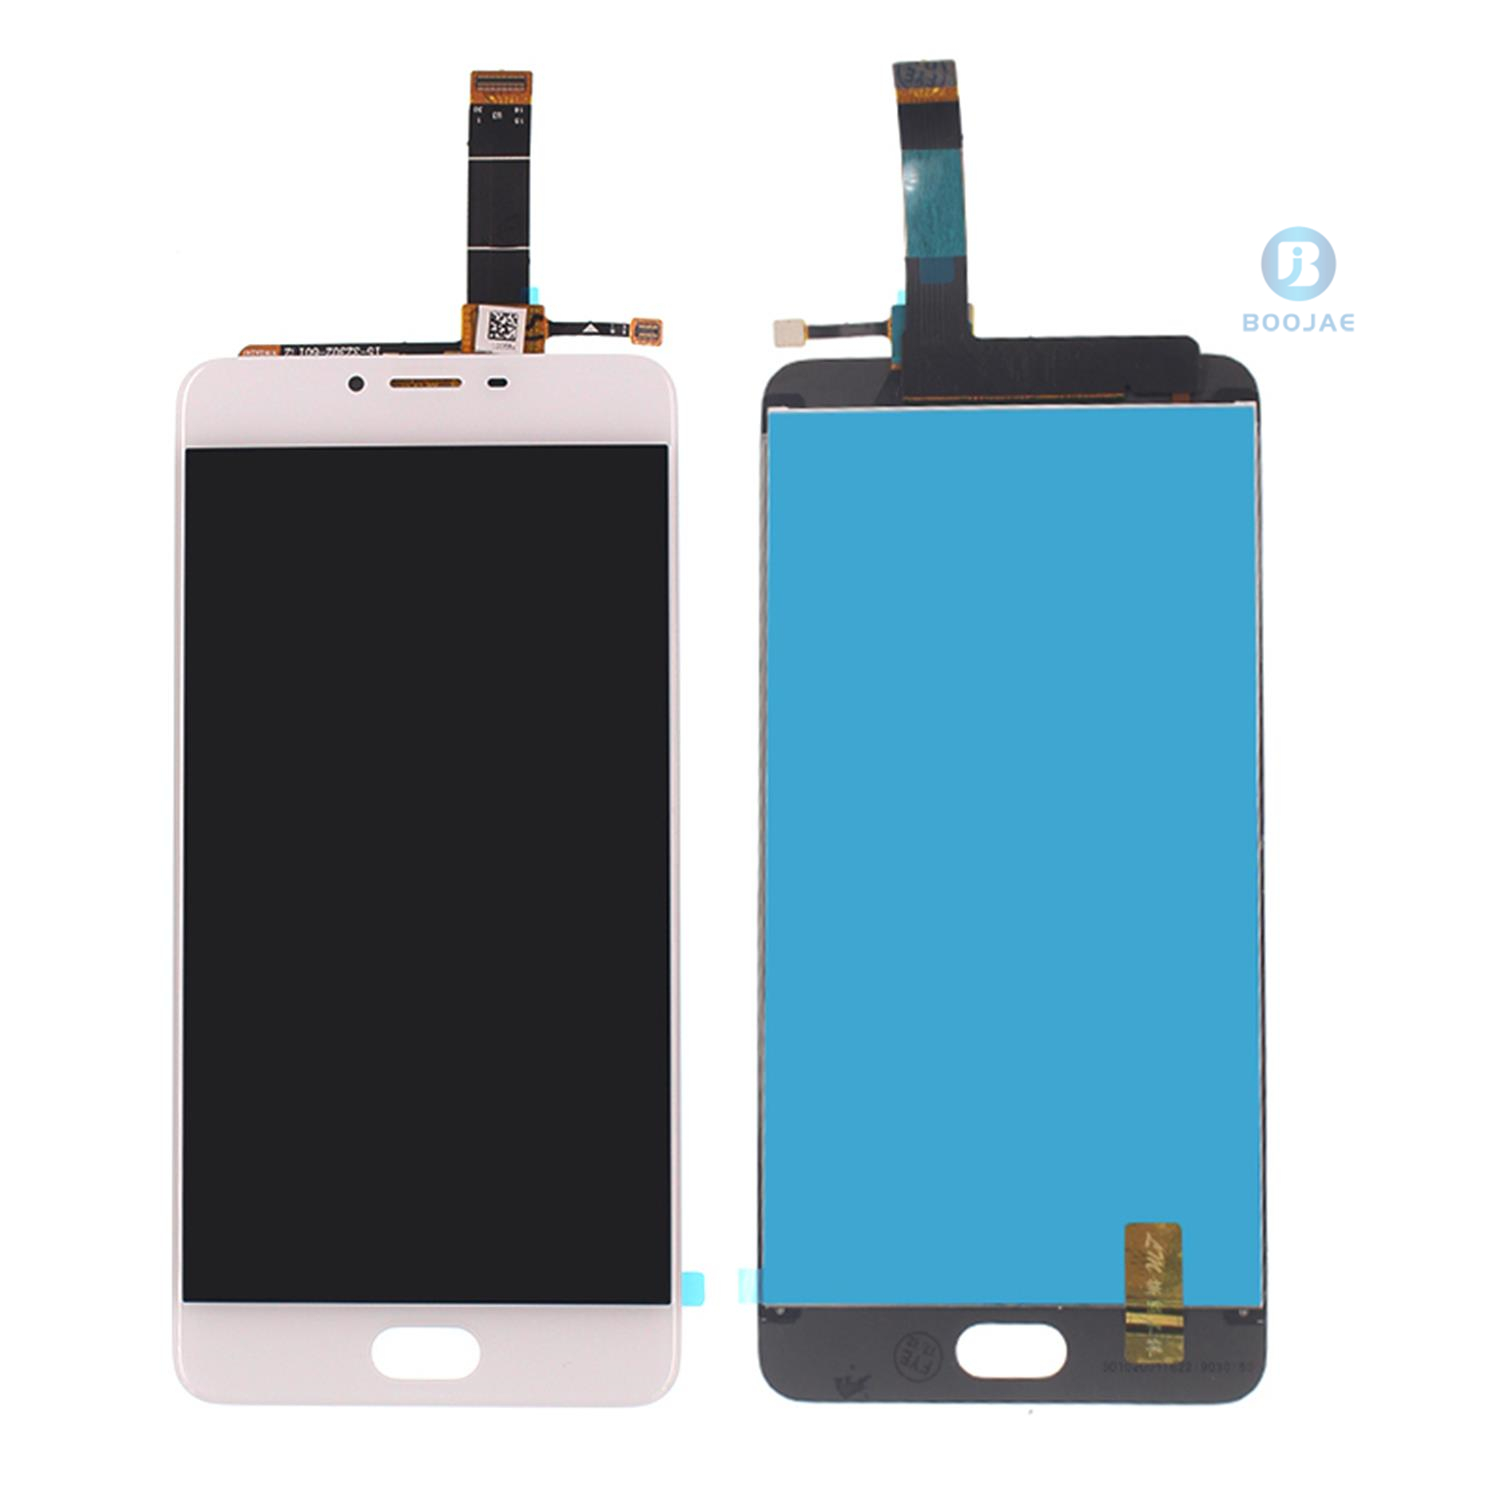 For Meizu Meilan U20 LCD Screen Display and Touch Panel Digitizer Assembly Replacement